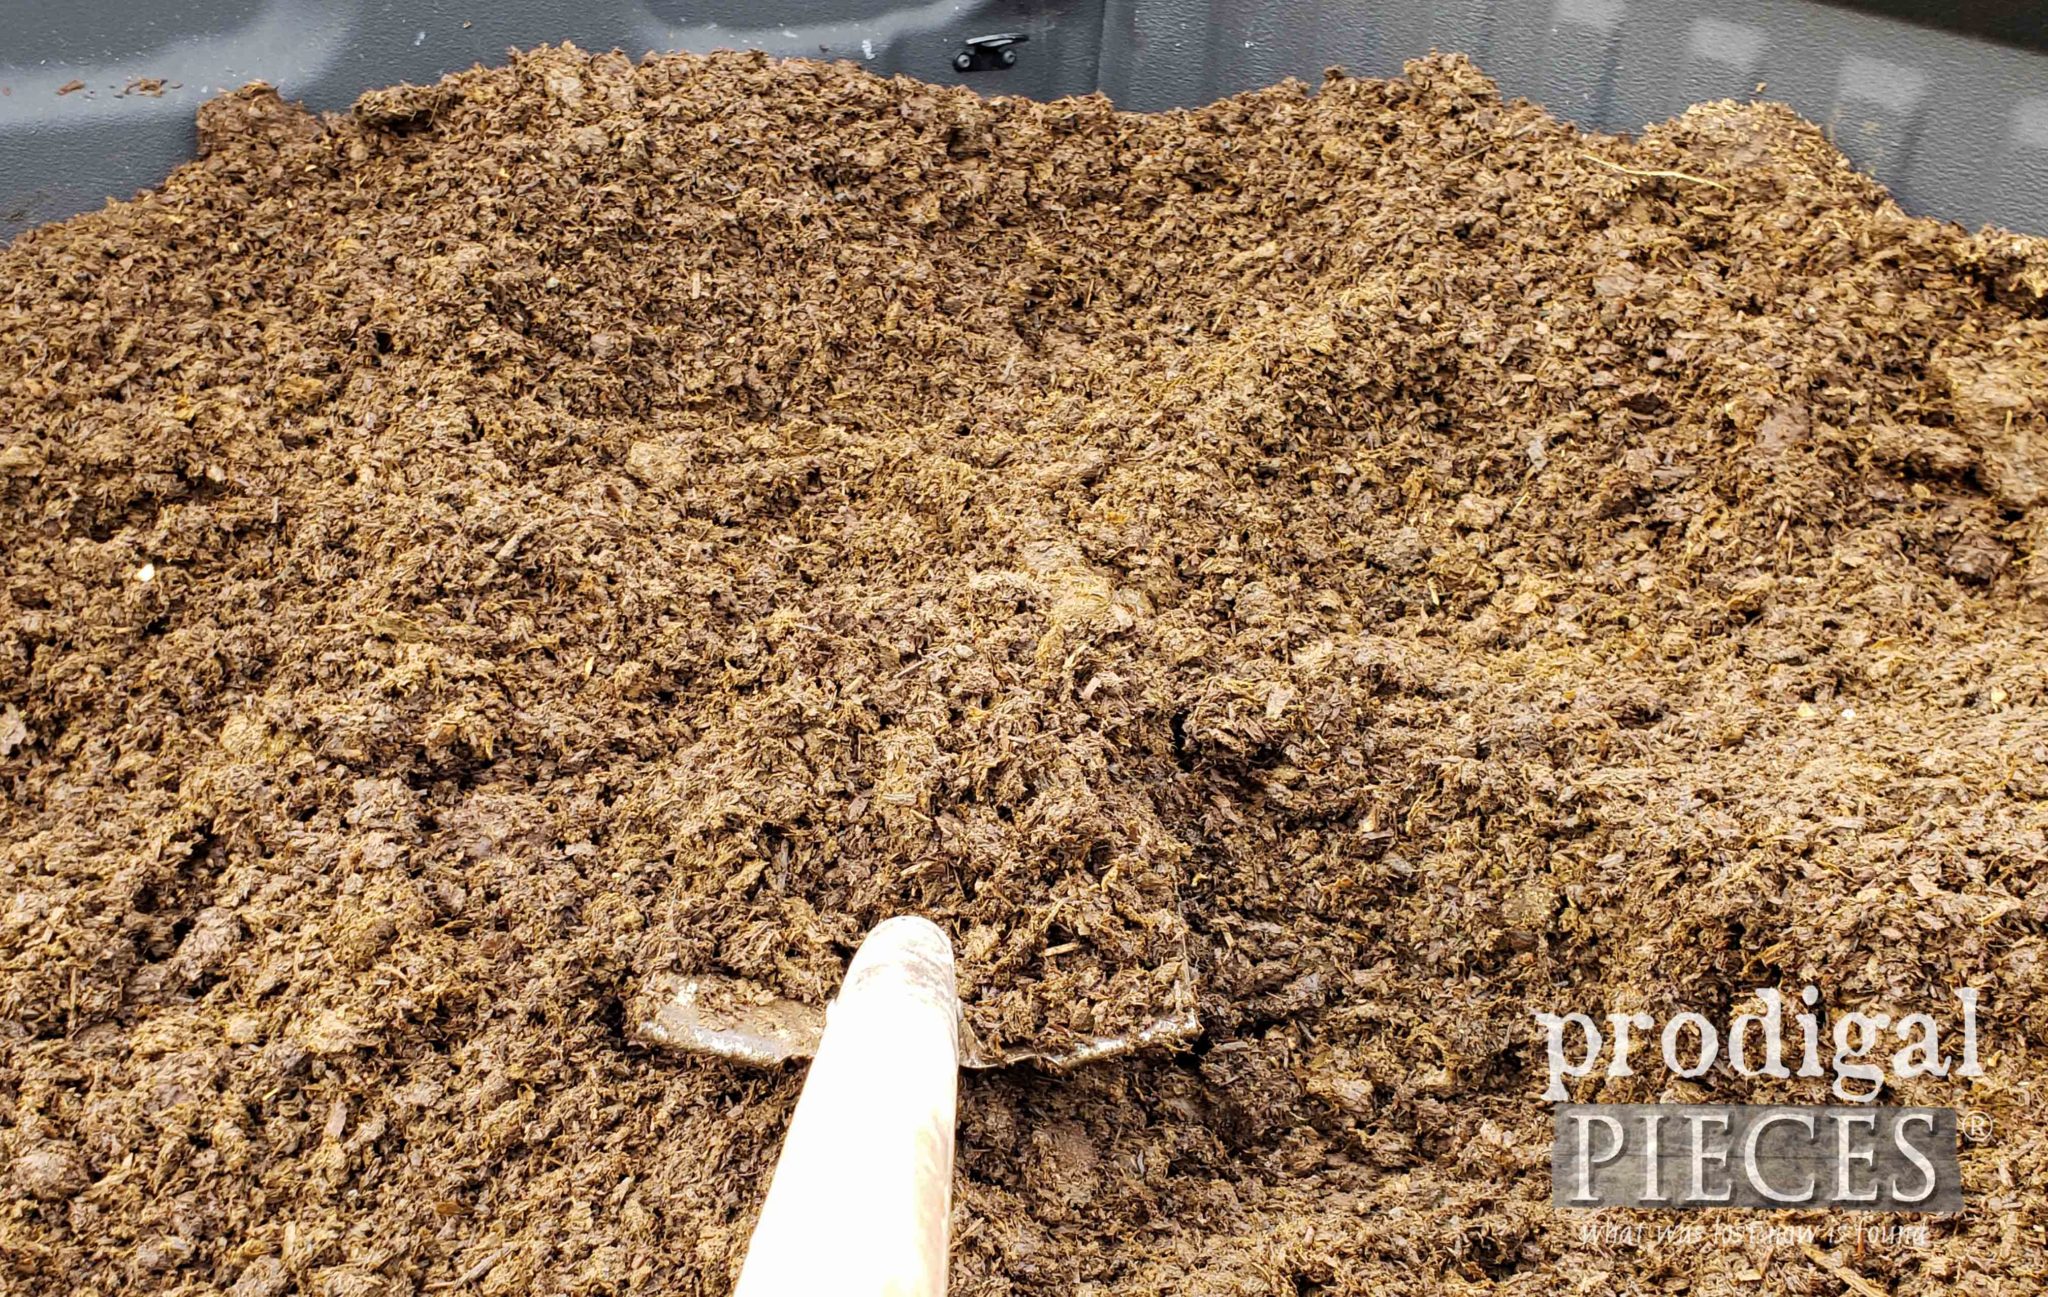 Composted Manure from Horse, Cow, and Chicken with Calcium added for a nourished garden | prodigalpieces.com #prodigalpieces #garden